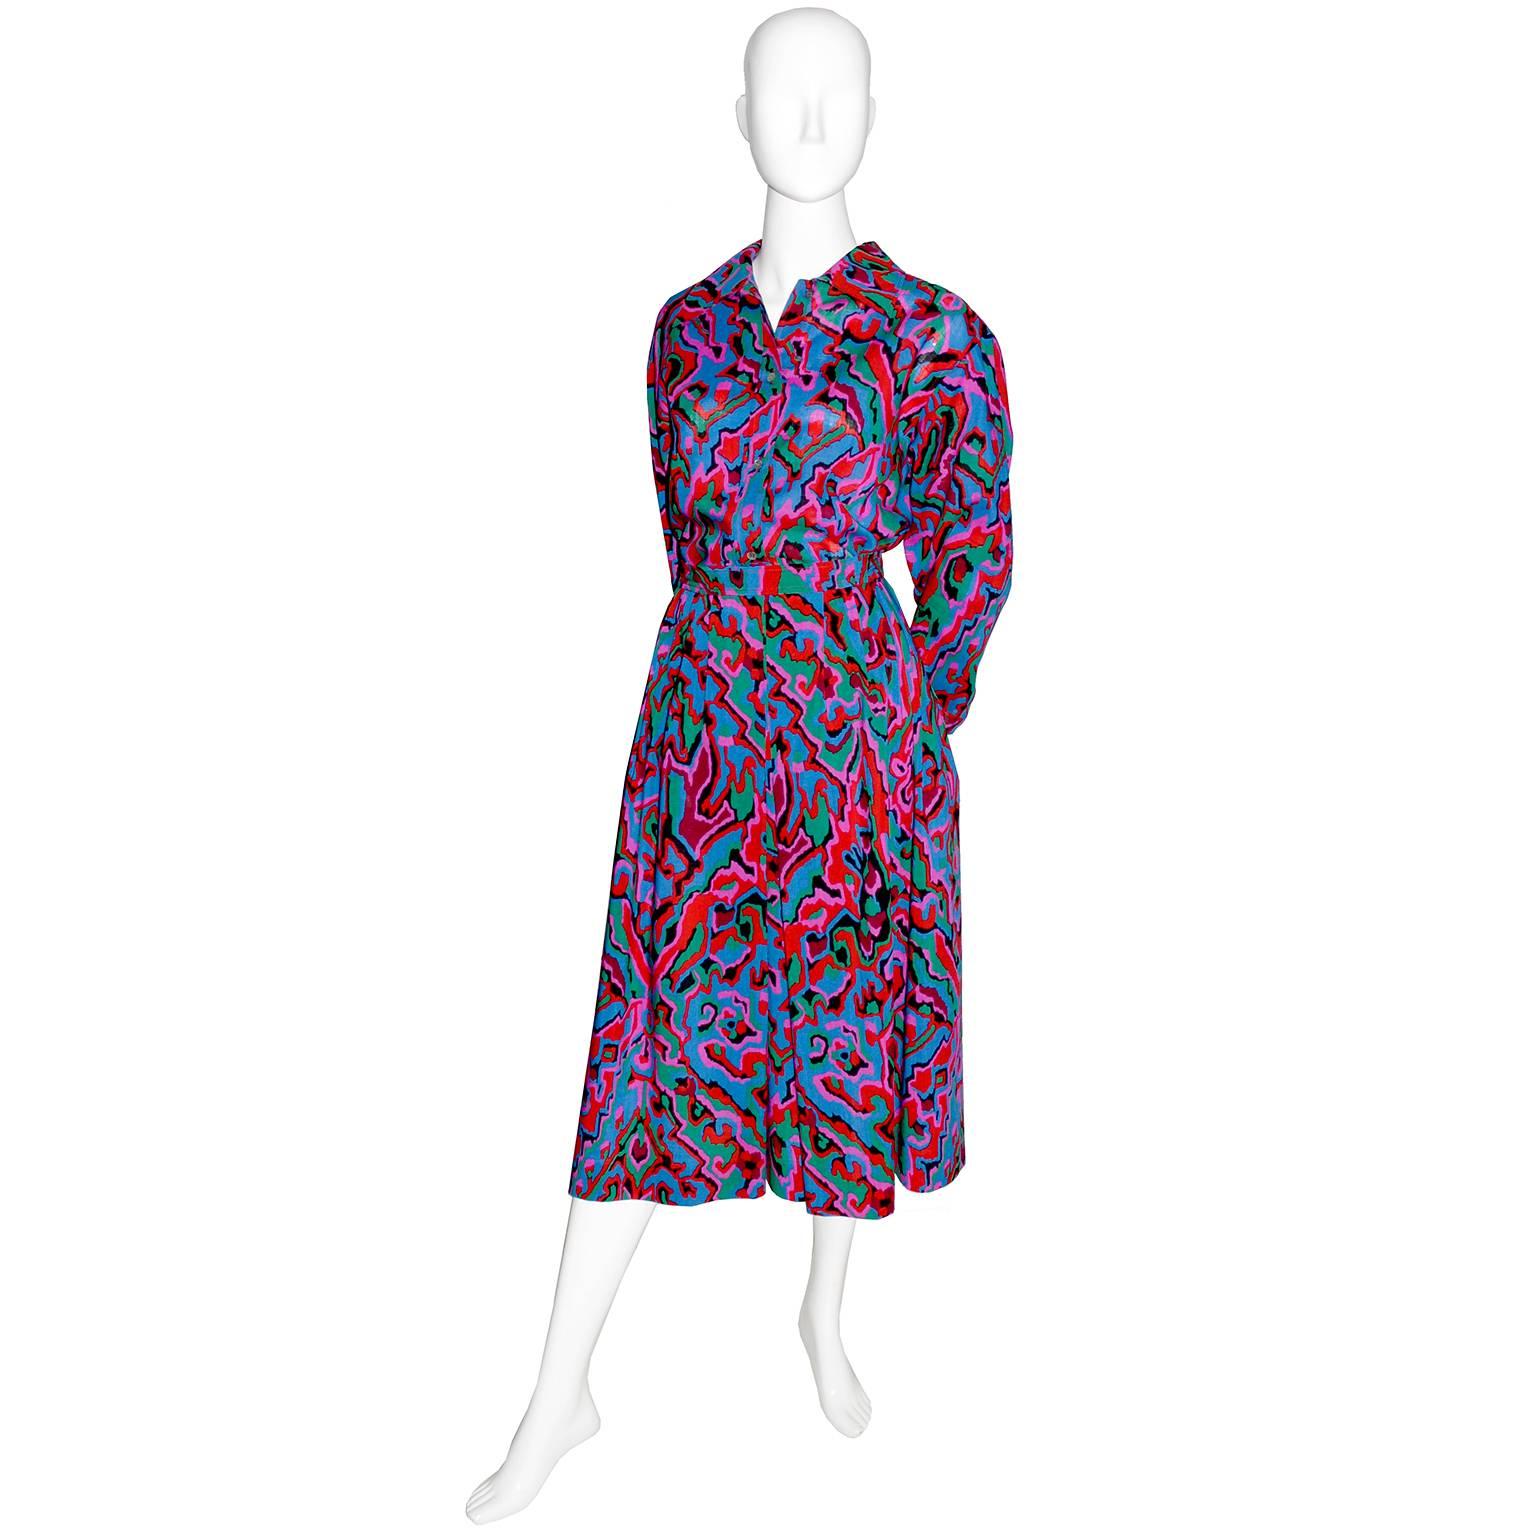 This vintage late 1970's YSL 2 piece dress has a beautiful button front blouse and a skirt with a fitted waistband.  This Saint Laurent Rive Gauche vintage outfit is in a fab multi colored print and the blouse is labeled a size 44, but please use